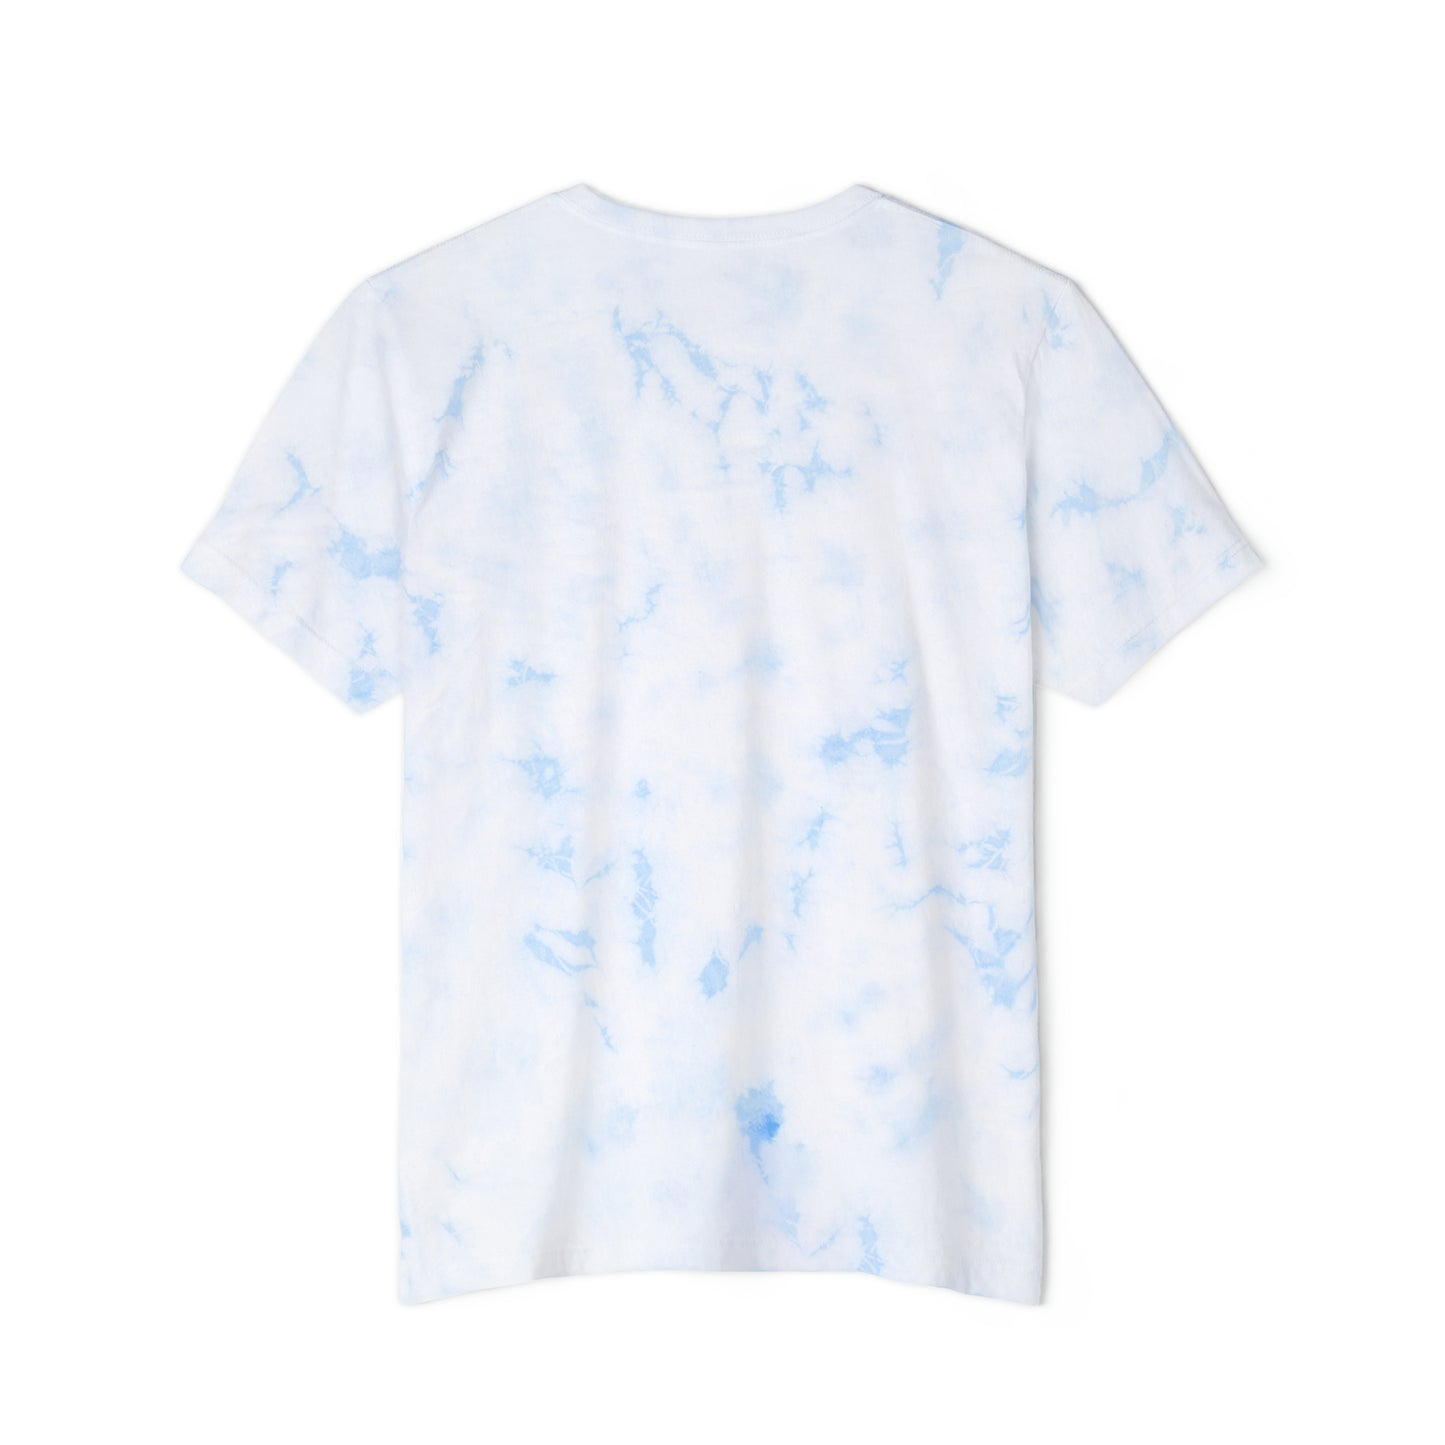 Be Part of the Story Unisex Fashion Tie-Dyed T-Shirt